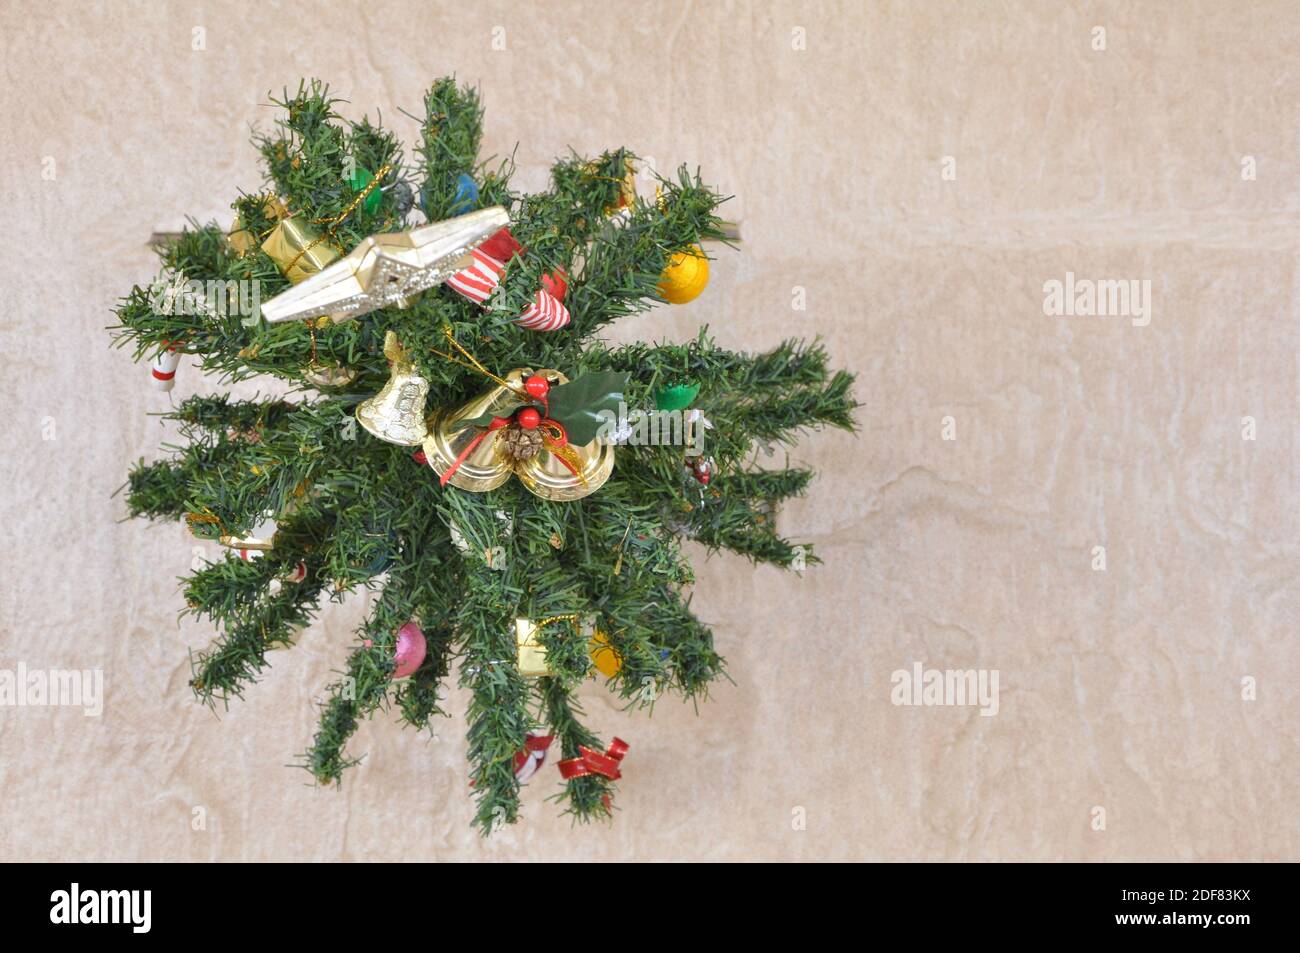 Christmas tree assembled with Santa Claus accessories in top view on ceramic floor background Stock Photo